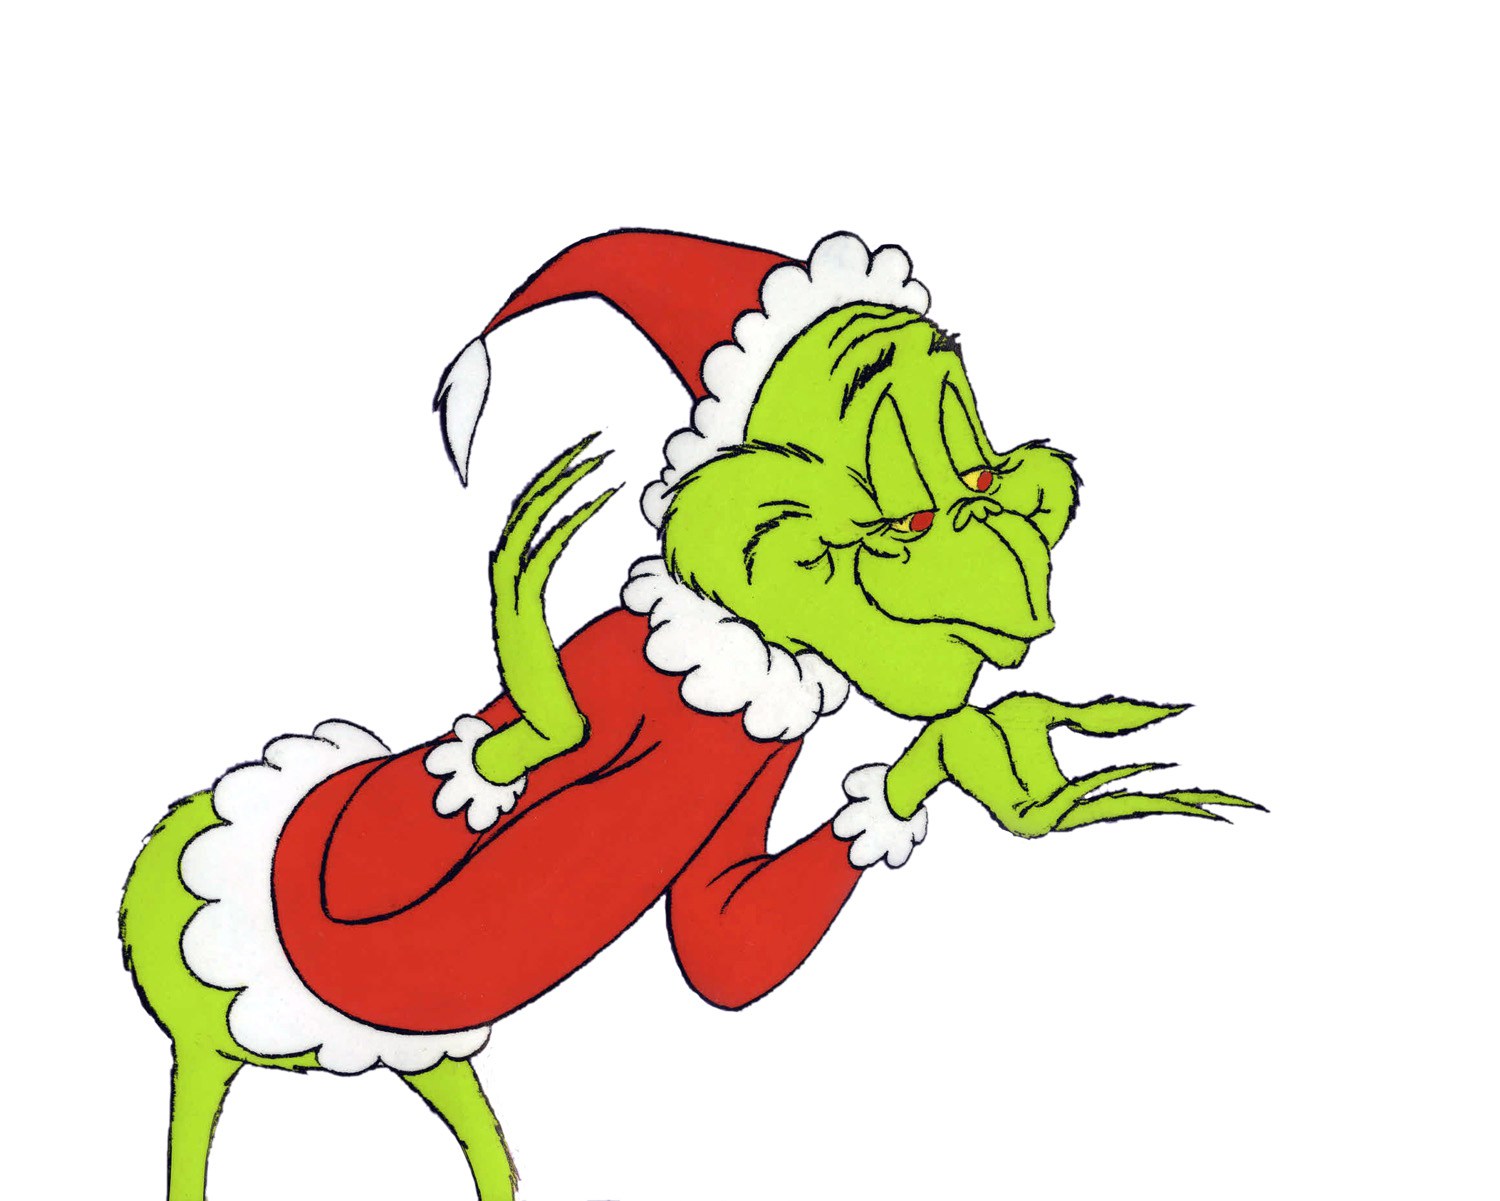 How The Grinch Stole Christmas Cartoon Characters That The Grinch Is